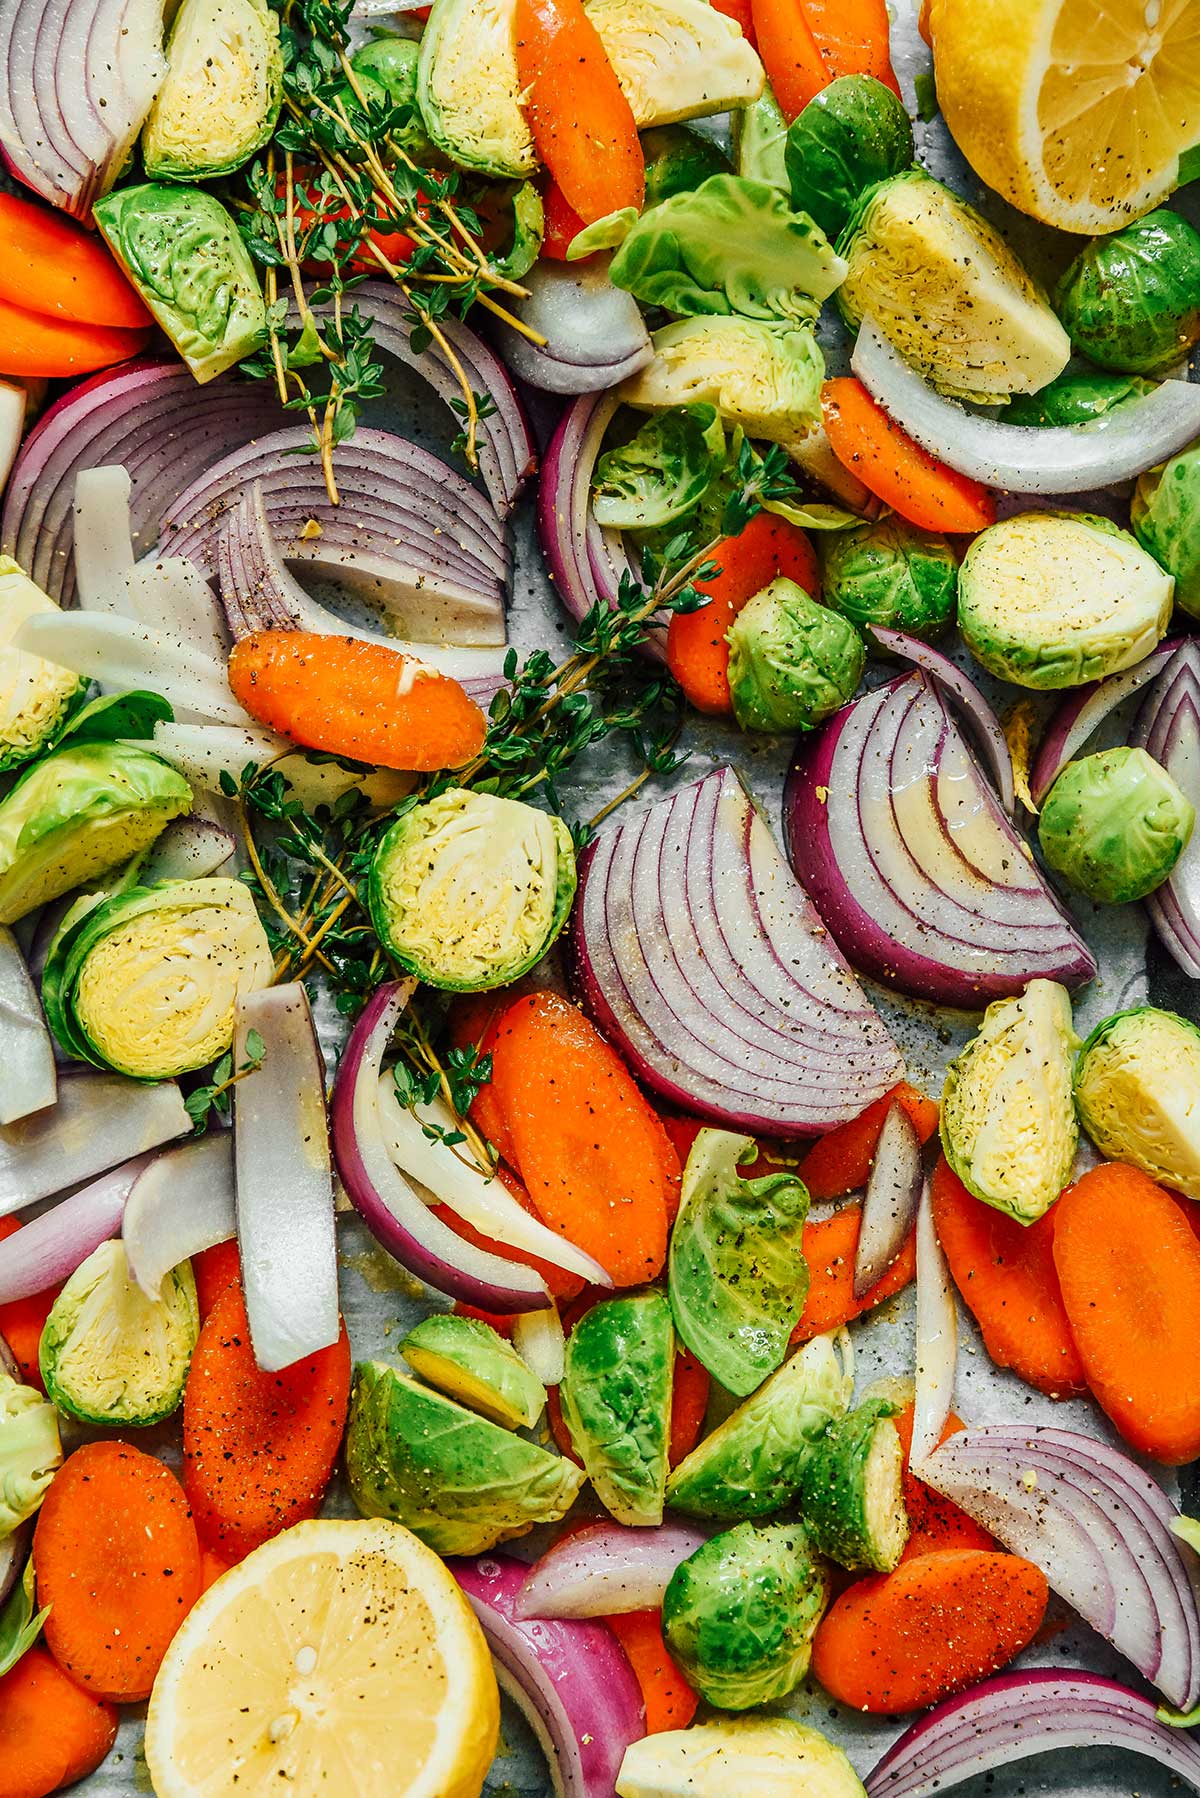 A close-up view detailing the texture of freshly seasoned red onion slices, carrot slices, and halved Brussels sprouts